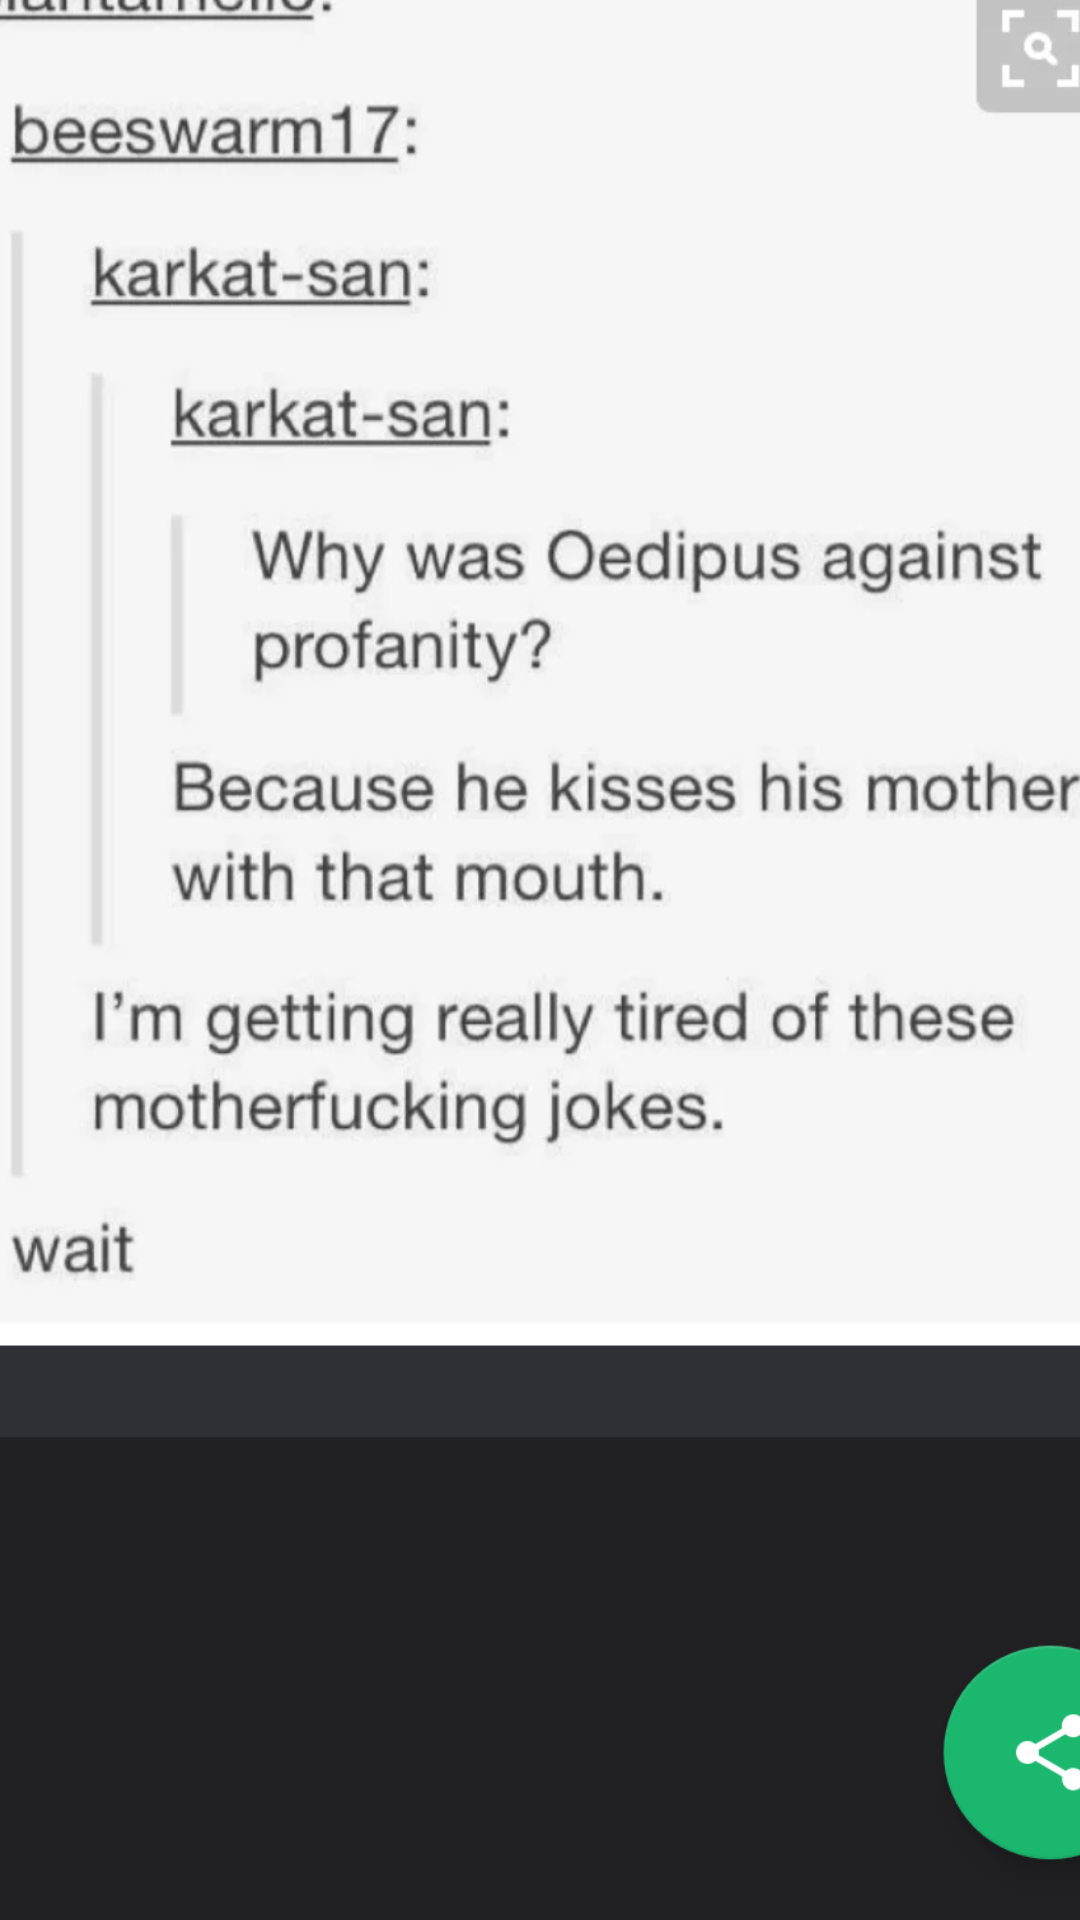 screenshot - Iui Ilullitio beeswarm 17 karkatsan karkatsan Why was Oedipus against profanity? Because he kisses his mother with that mouth. I'm getting really tired of these motherfucking jokes. wait